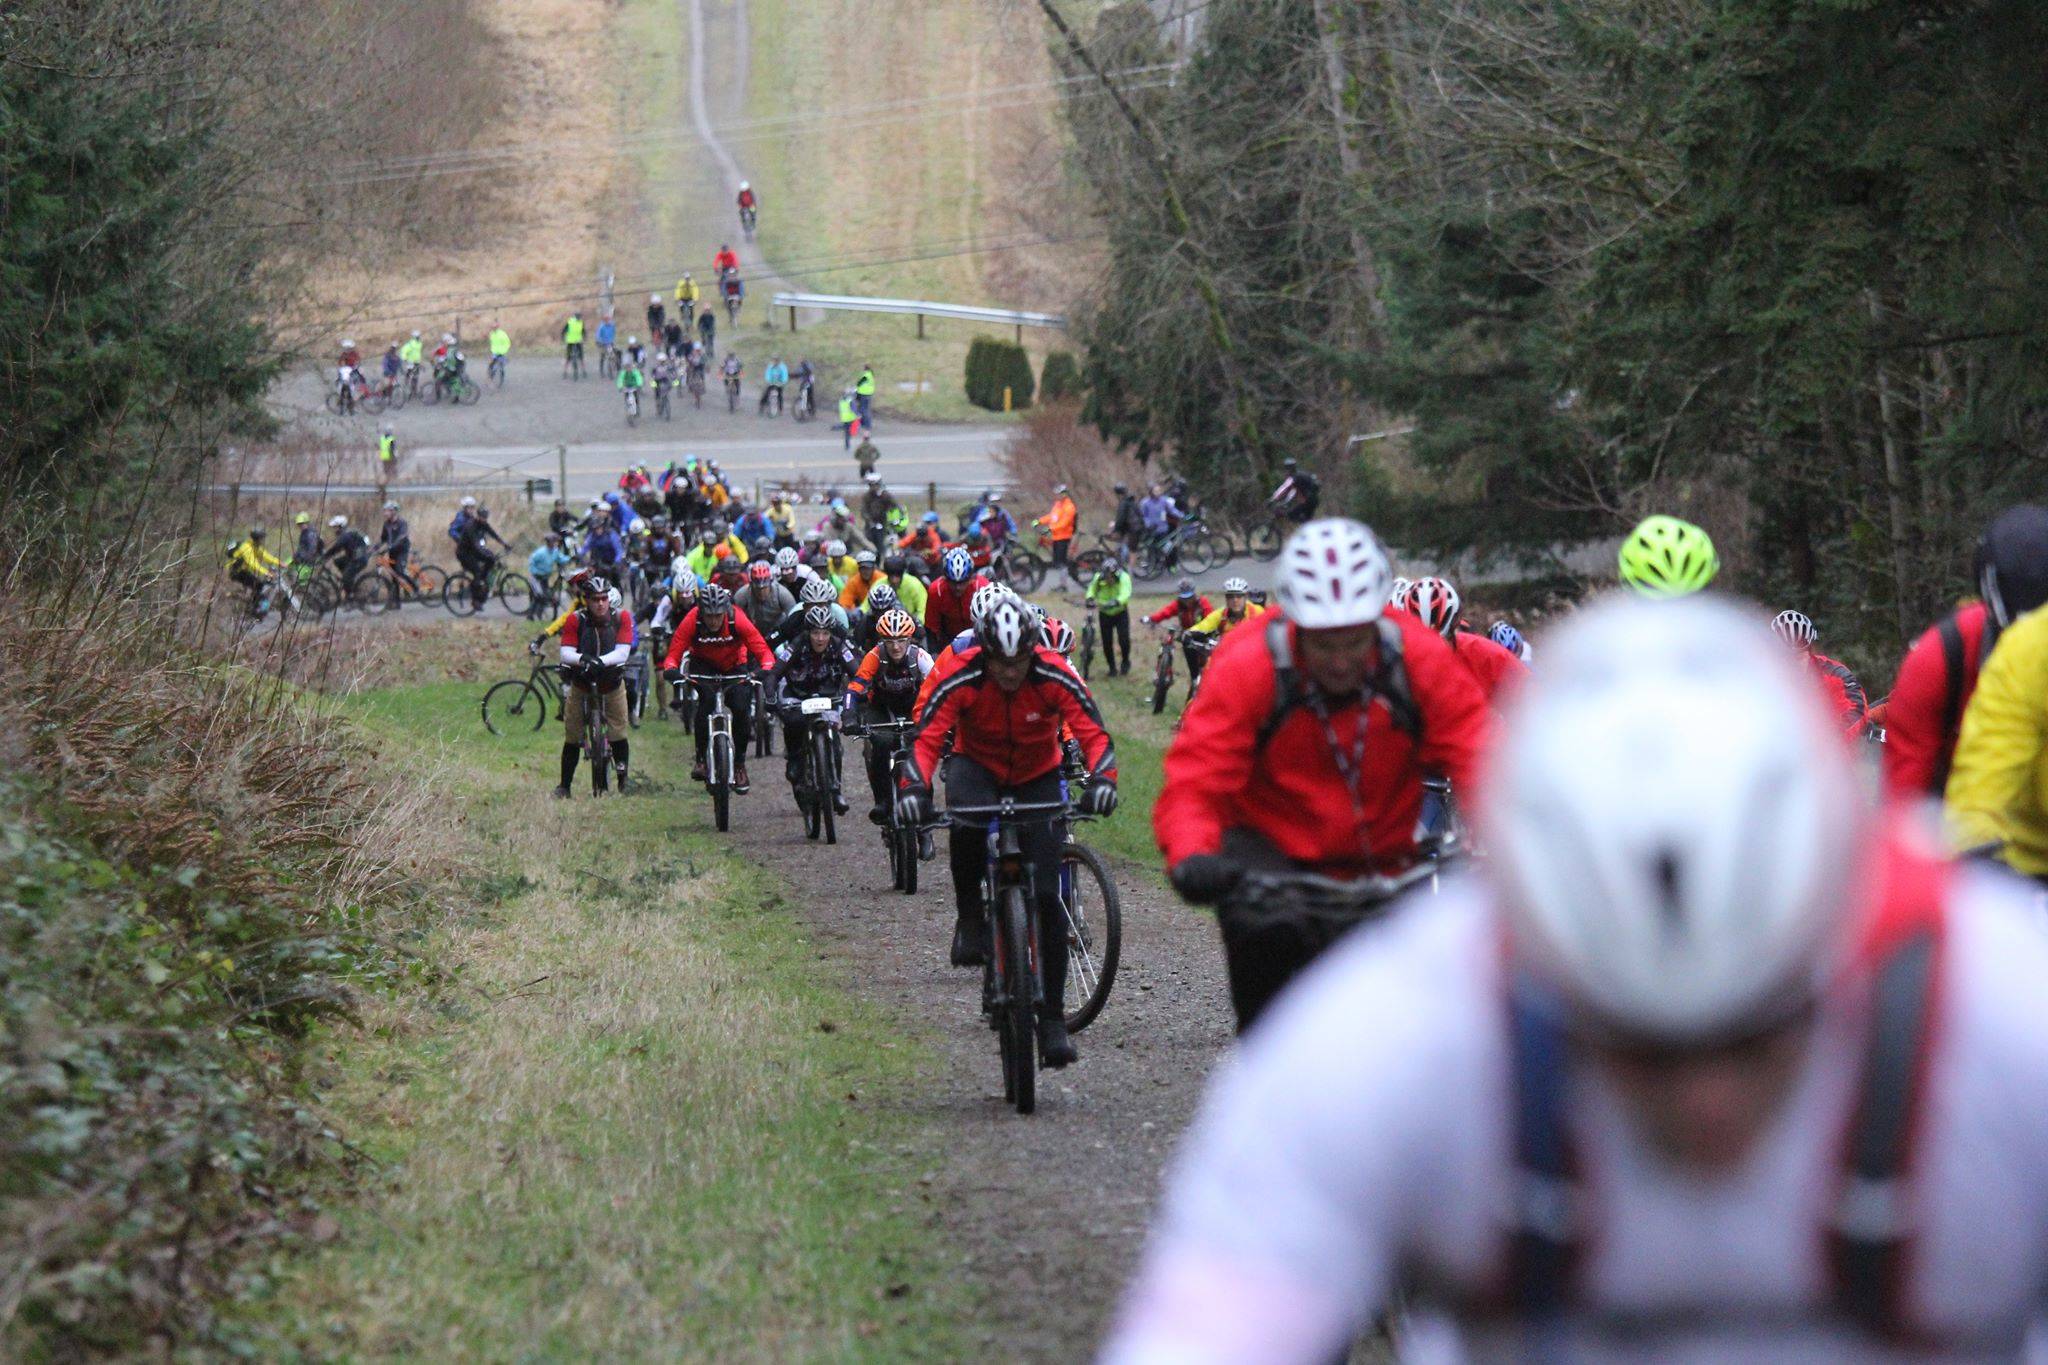 Riders tackle the Stinky Spoke course in Redmond. Courtesy photo